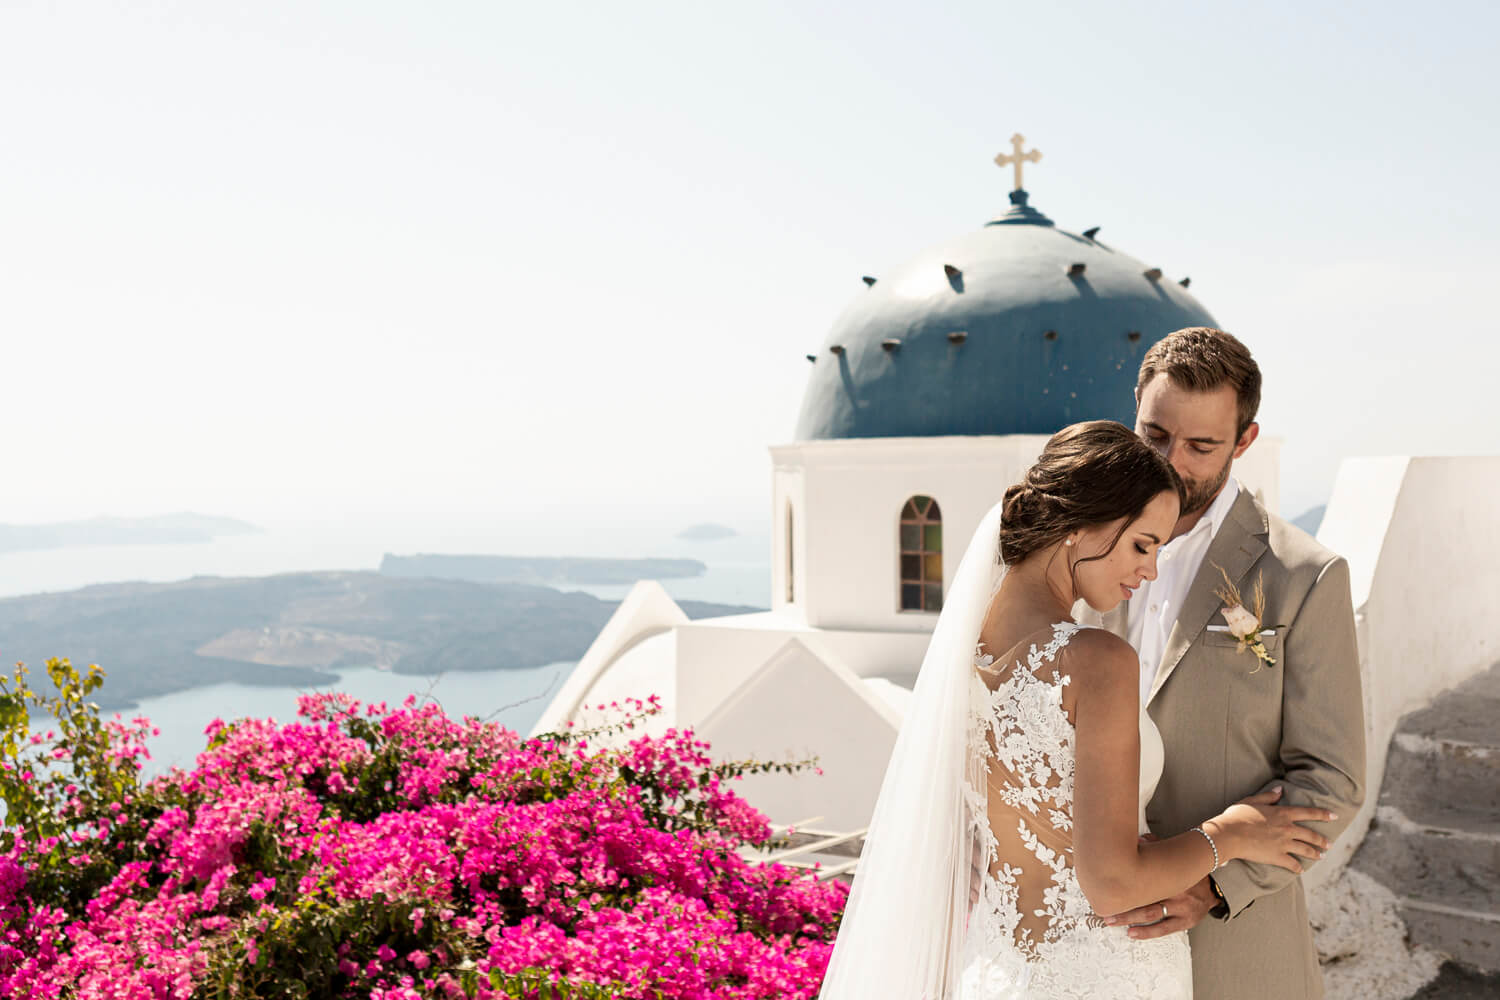 All the way from Greece to you - Greek Wedding Traditions!